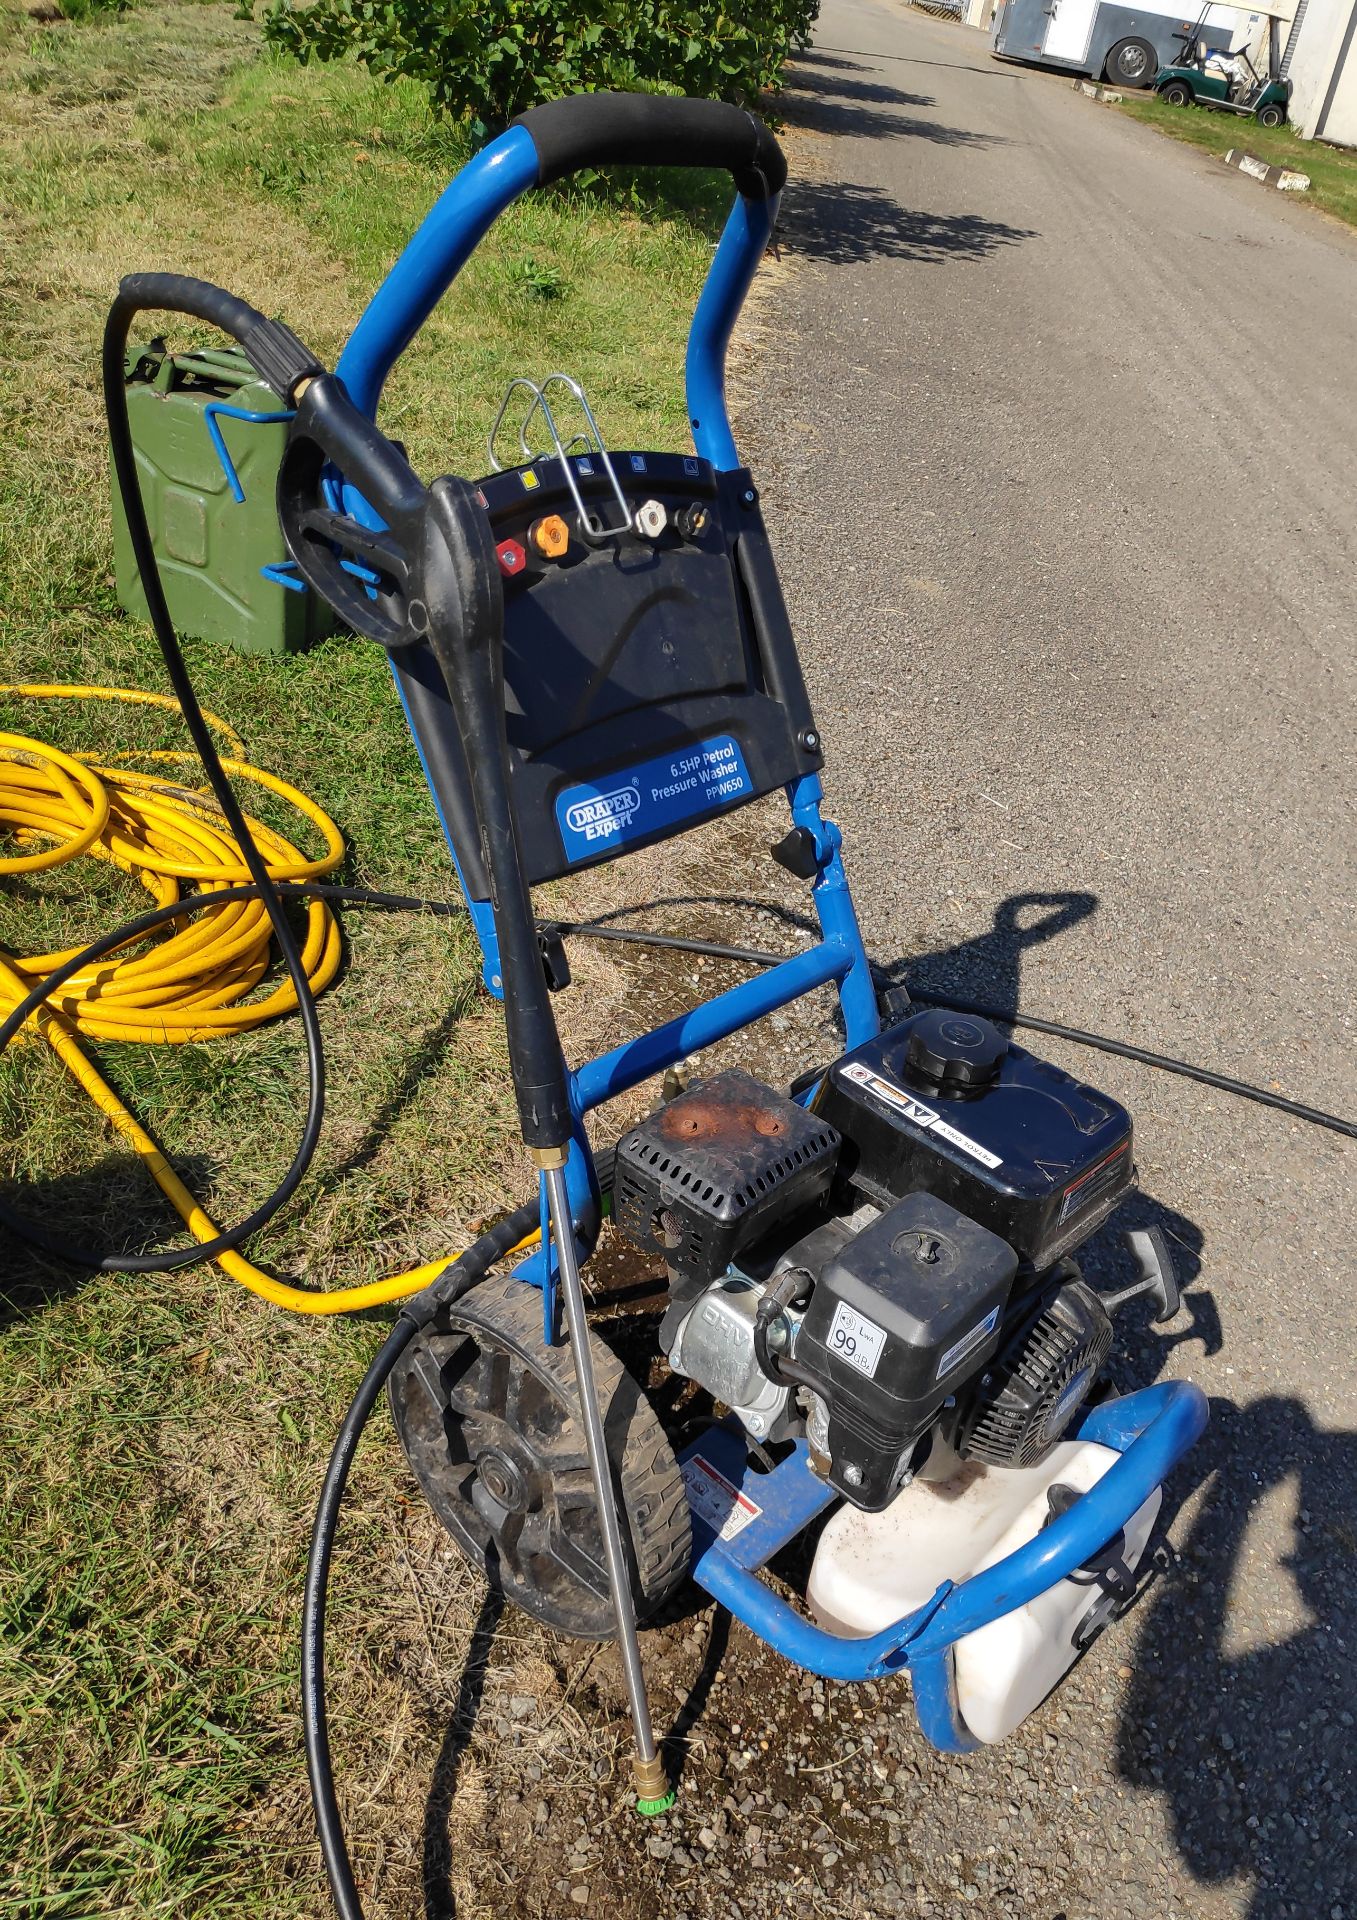 1 x Draper Expert 6.5Hp Petrol Pressure Washer PPW650 - CL011 - Location: Corby, Northamptonshire - Image 5 of 10